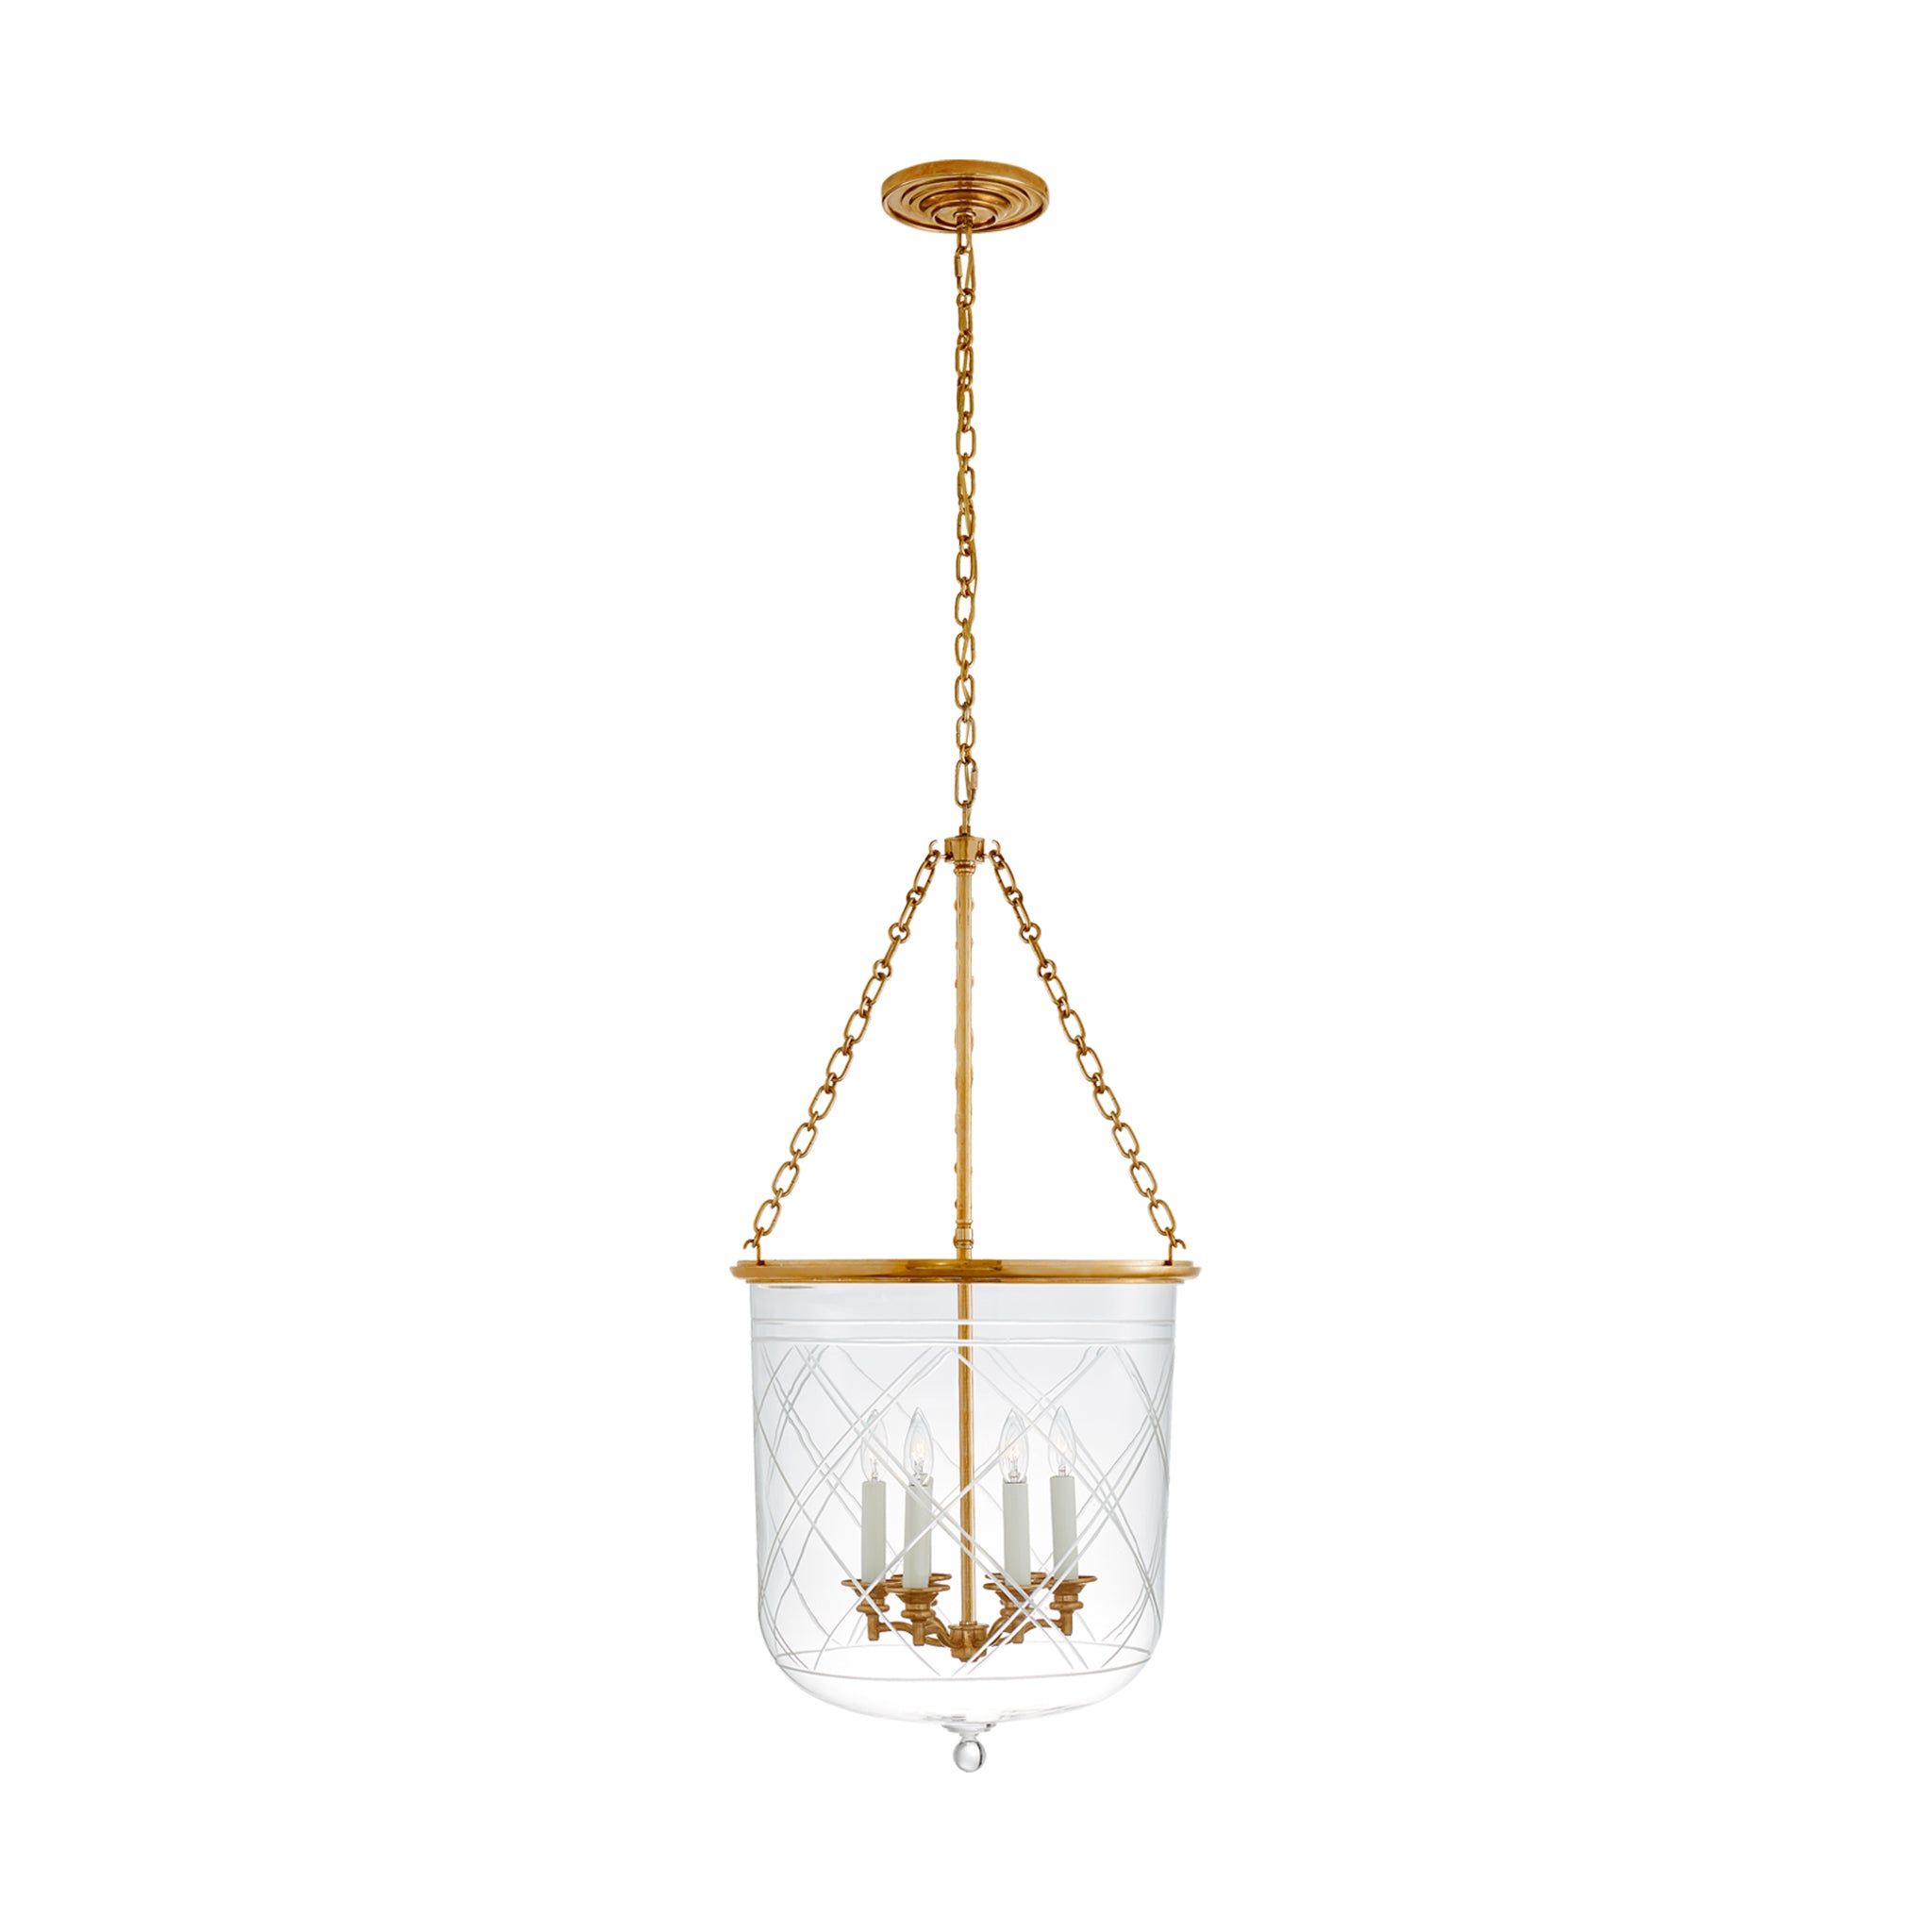 visual comfort cambridge large smoke bell pendant in natural brass with clear glass chandeliers 